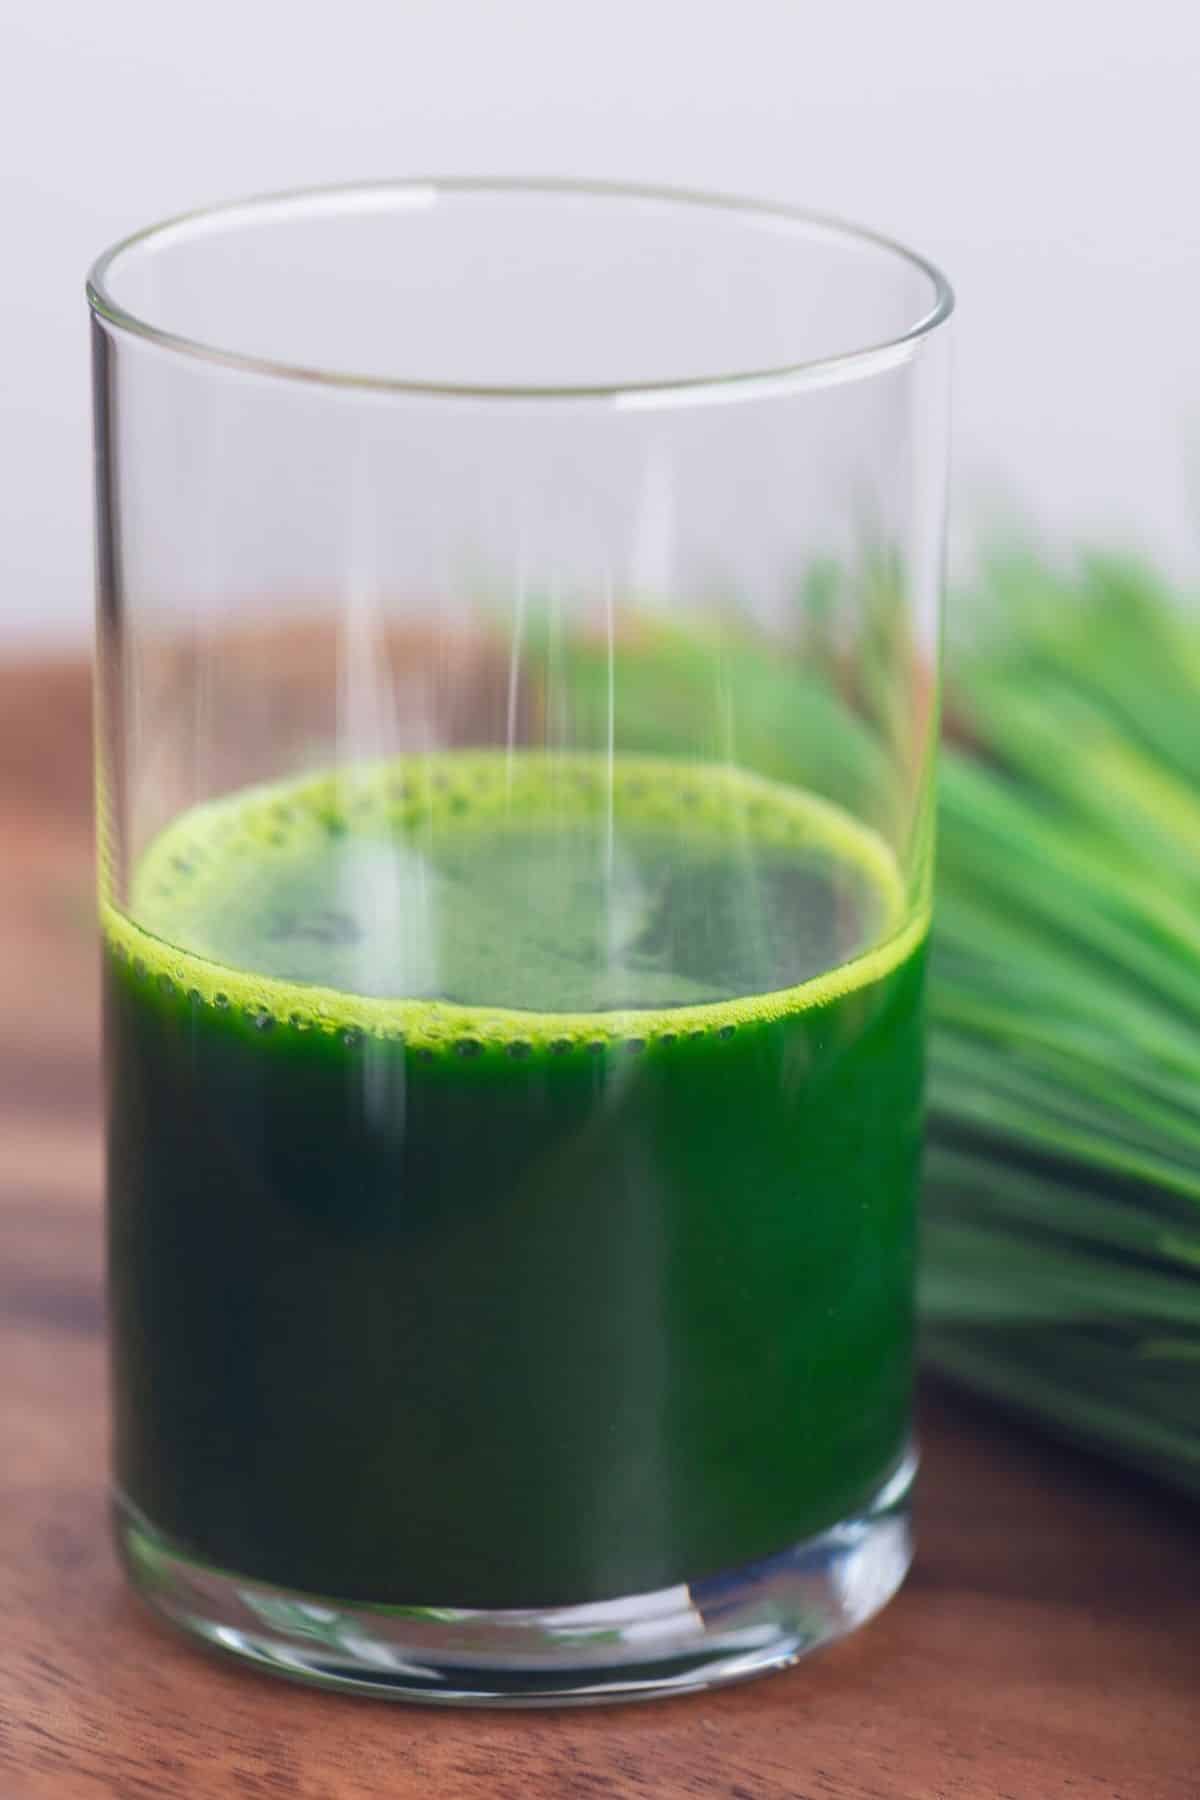 Wheatgrass juice in a small glass on a wooden surface.